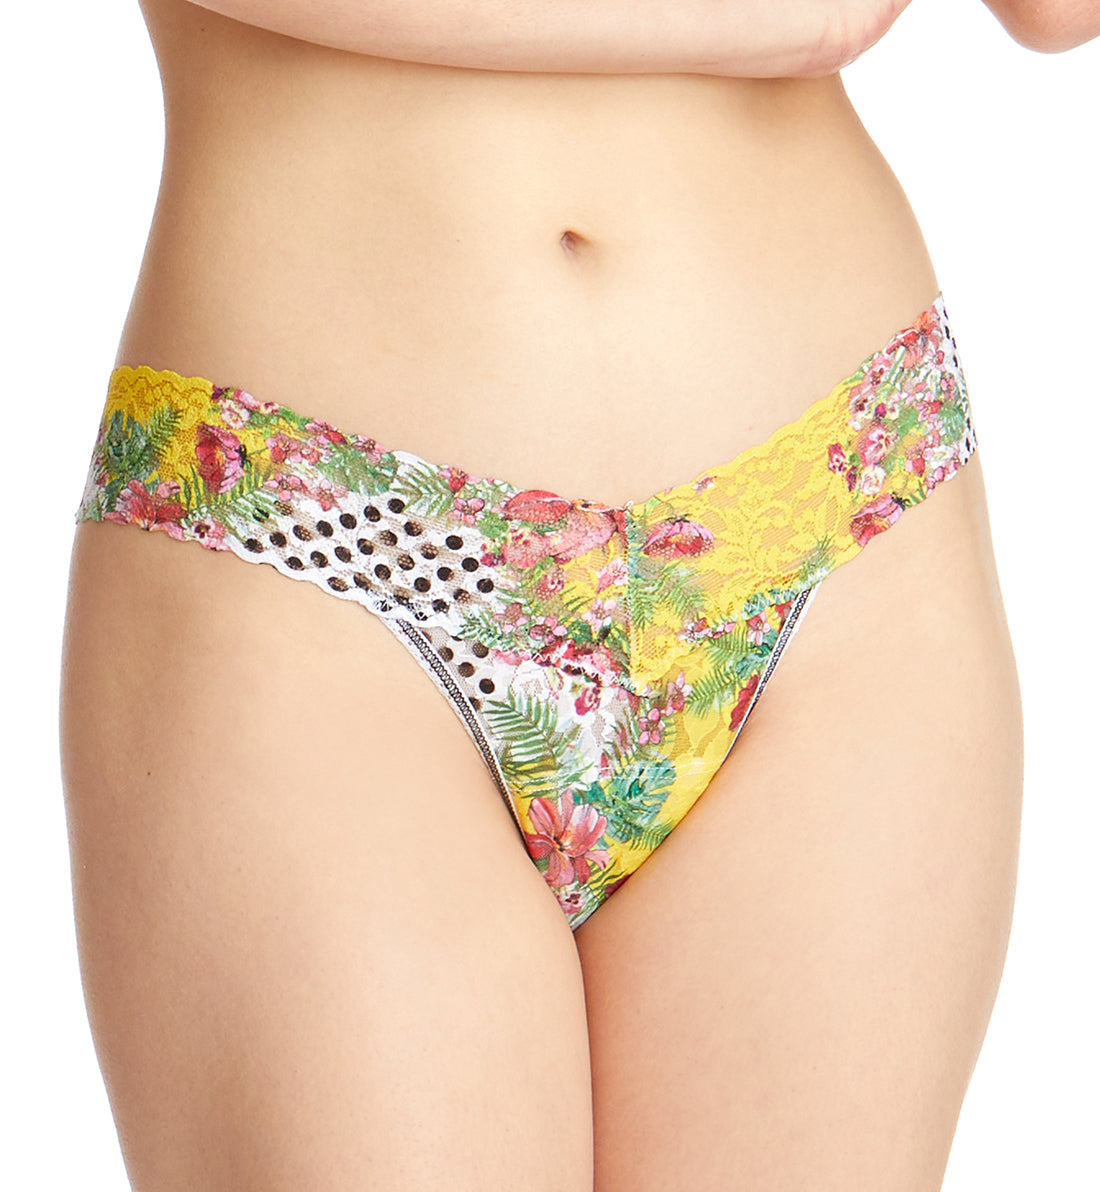 Hanky Panky Decades Teens Floral Mashup Low Rise Thong (MIX TAPE BOX) - Teens Floral Mashup,One Size